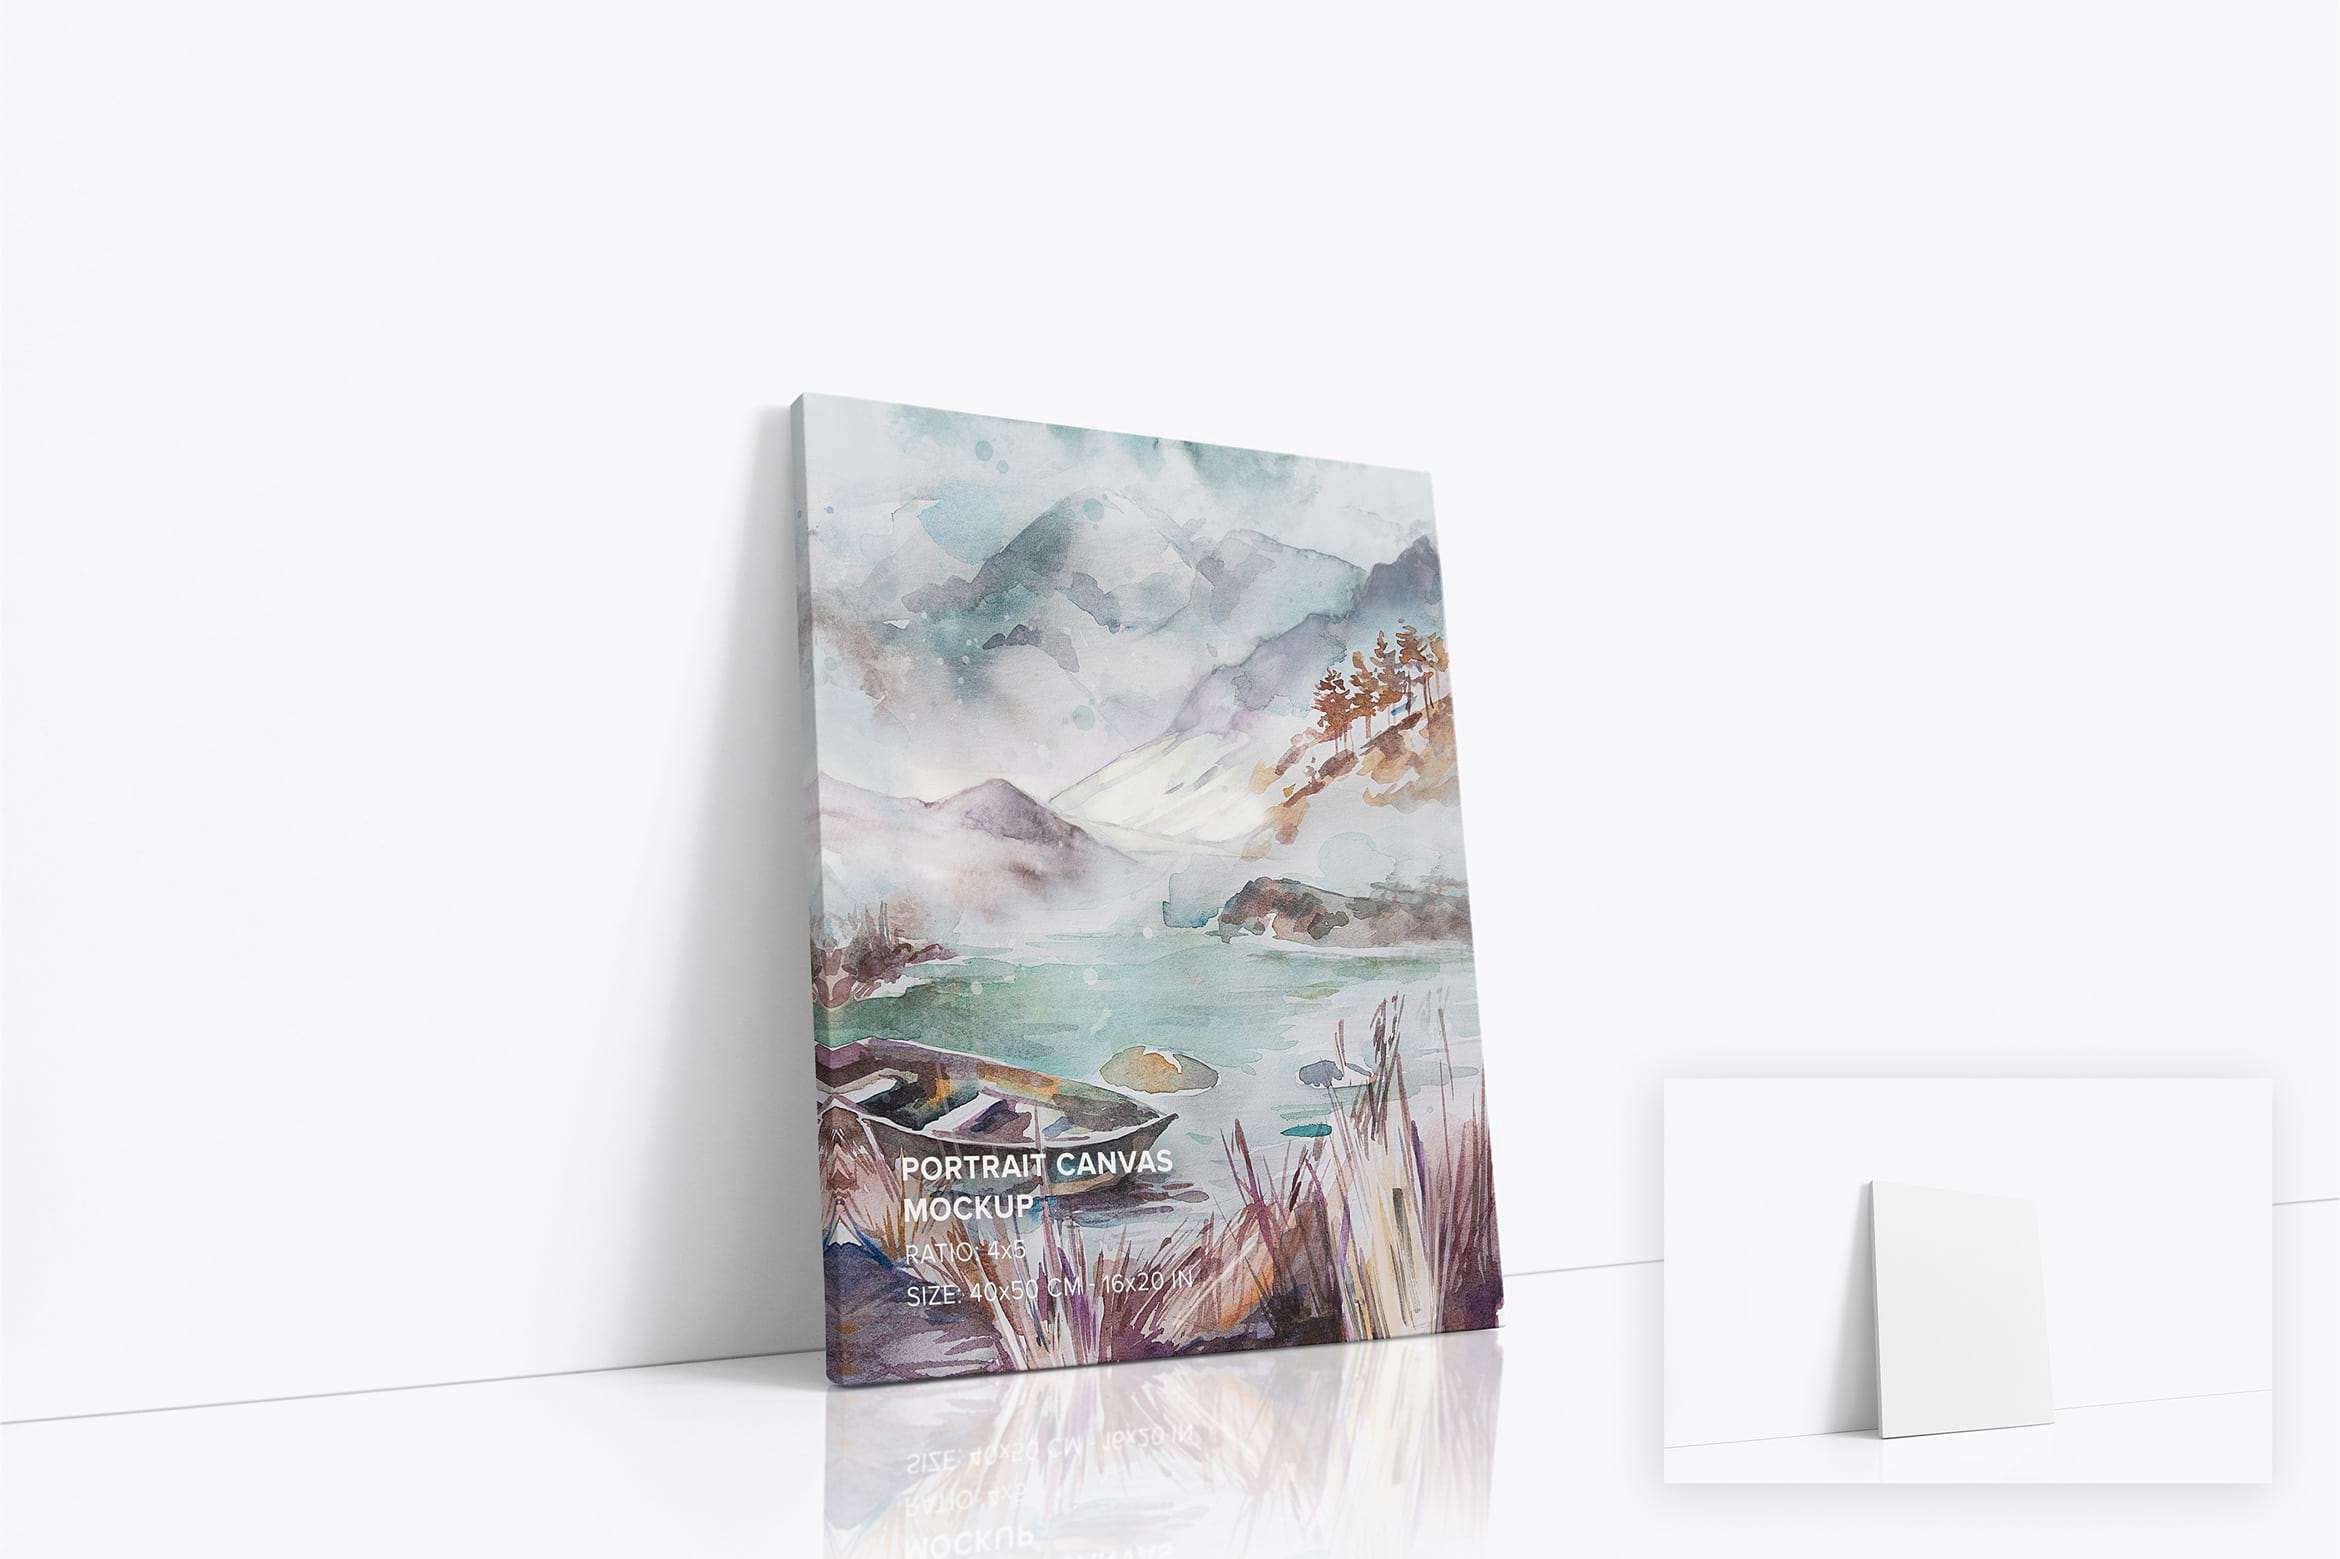 Leaning on Wall Portrait Canvas 4x5 Mockup 0.75 Wrap